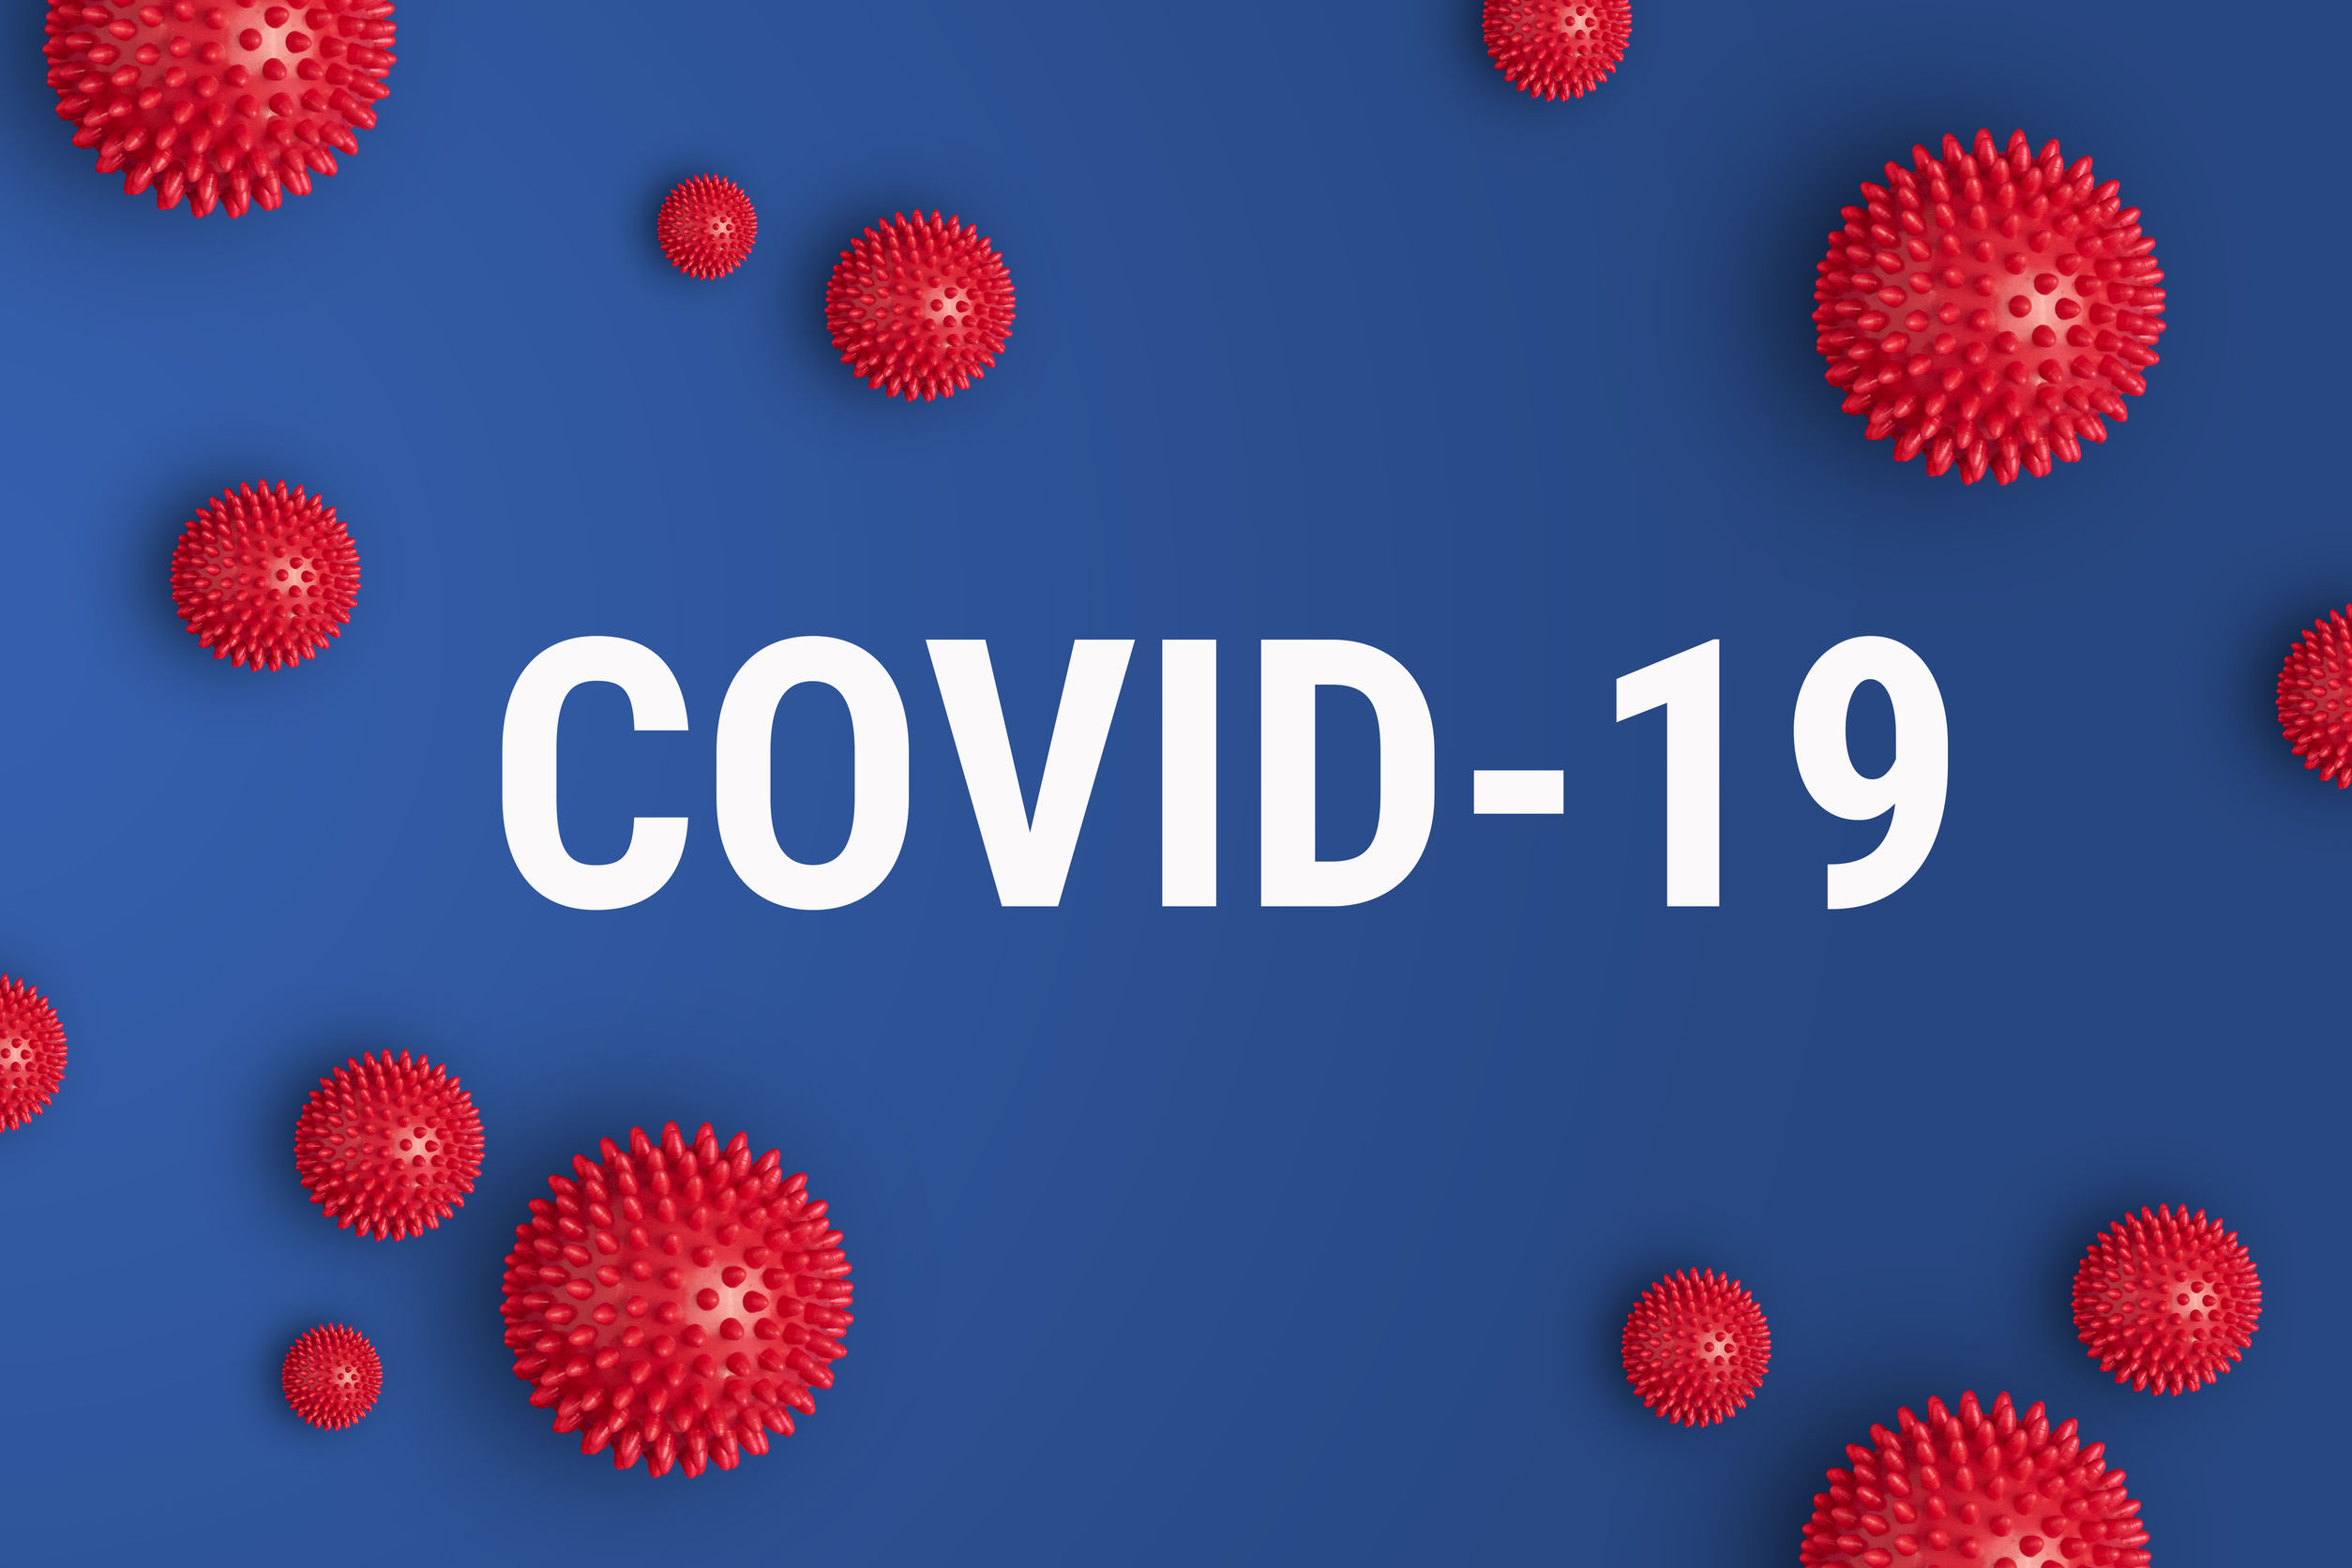 Inscription COVID-19 on blue background with red strain model of coronavirus